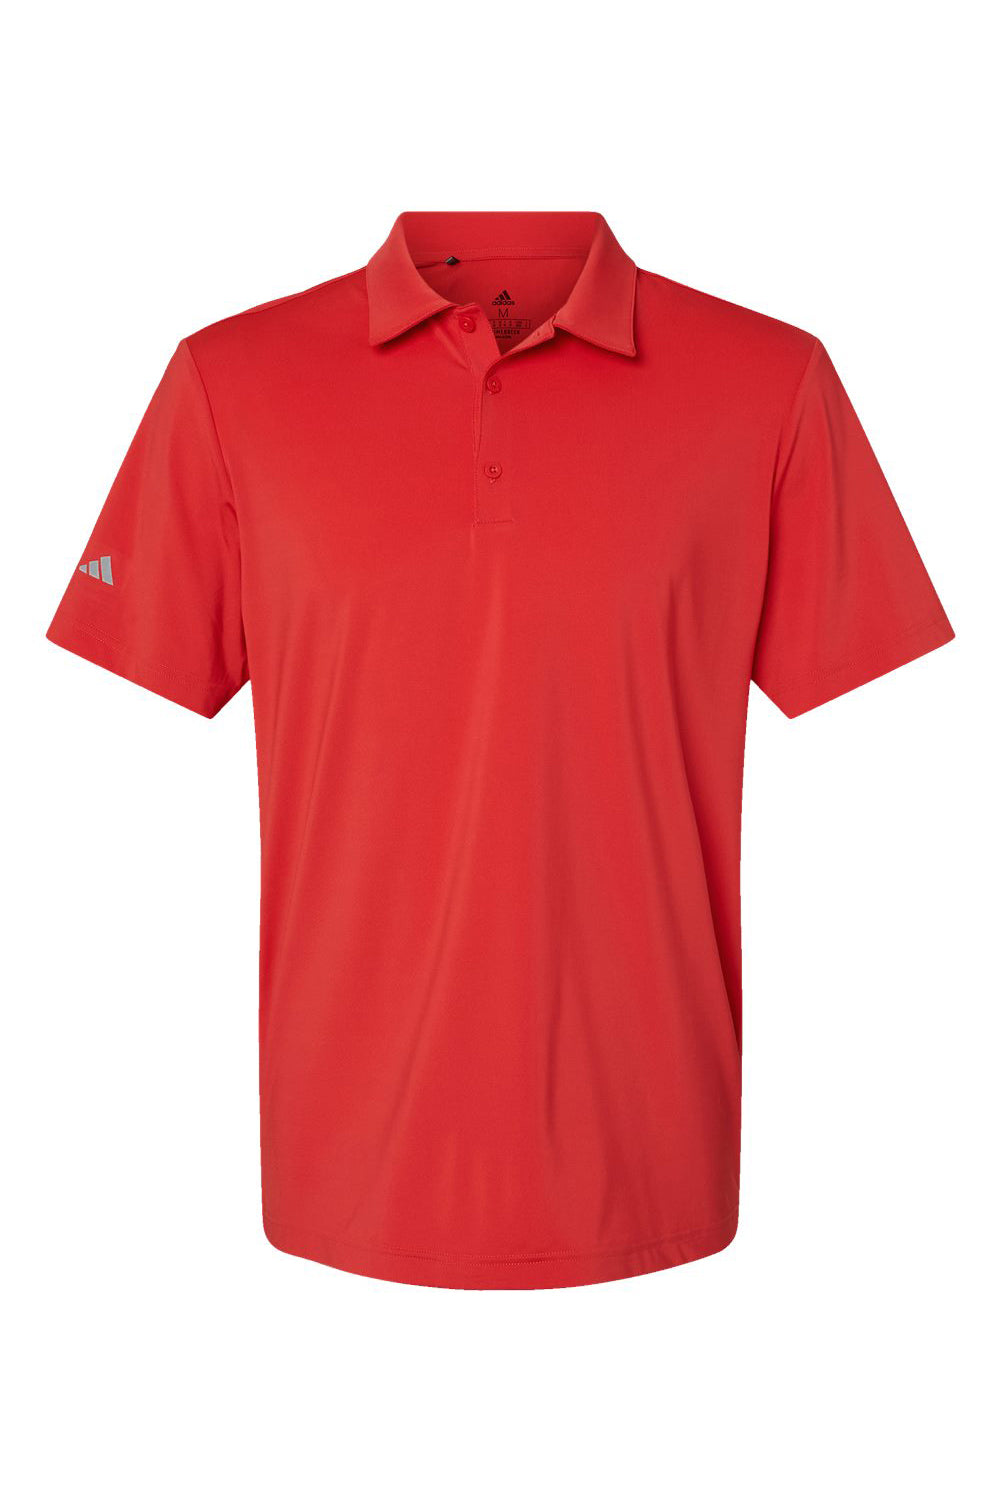 Adidas A514 Mens Ultimate Moisture Wicking Short Sleeve Polo Shirt Real Coral Flat Front